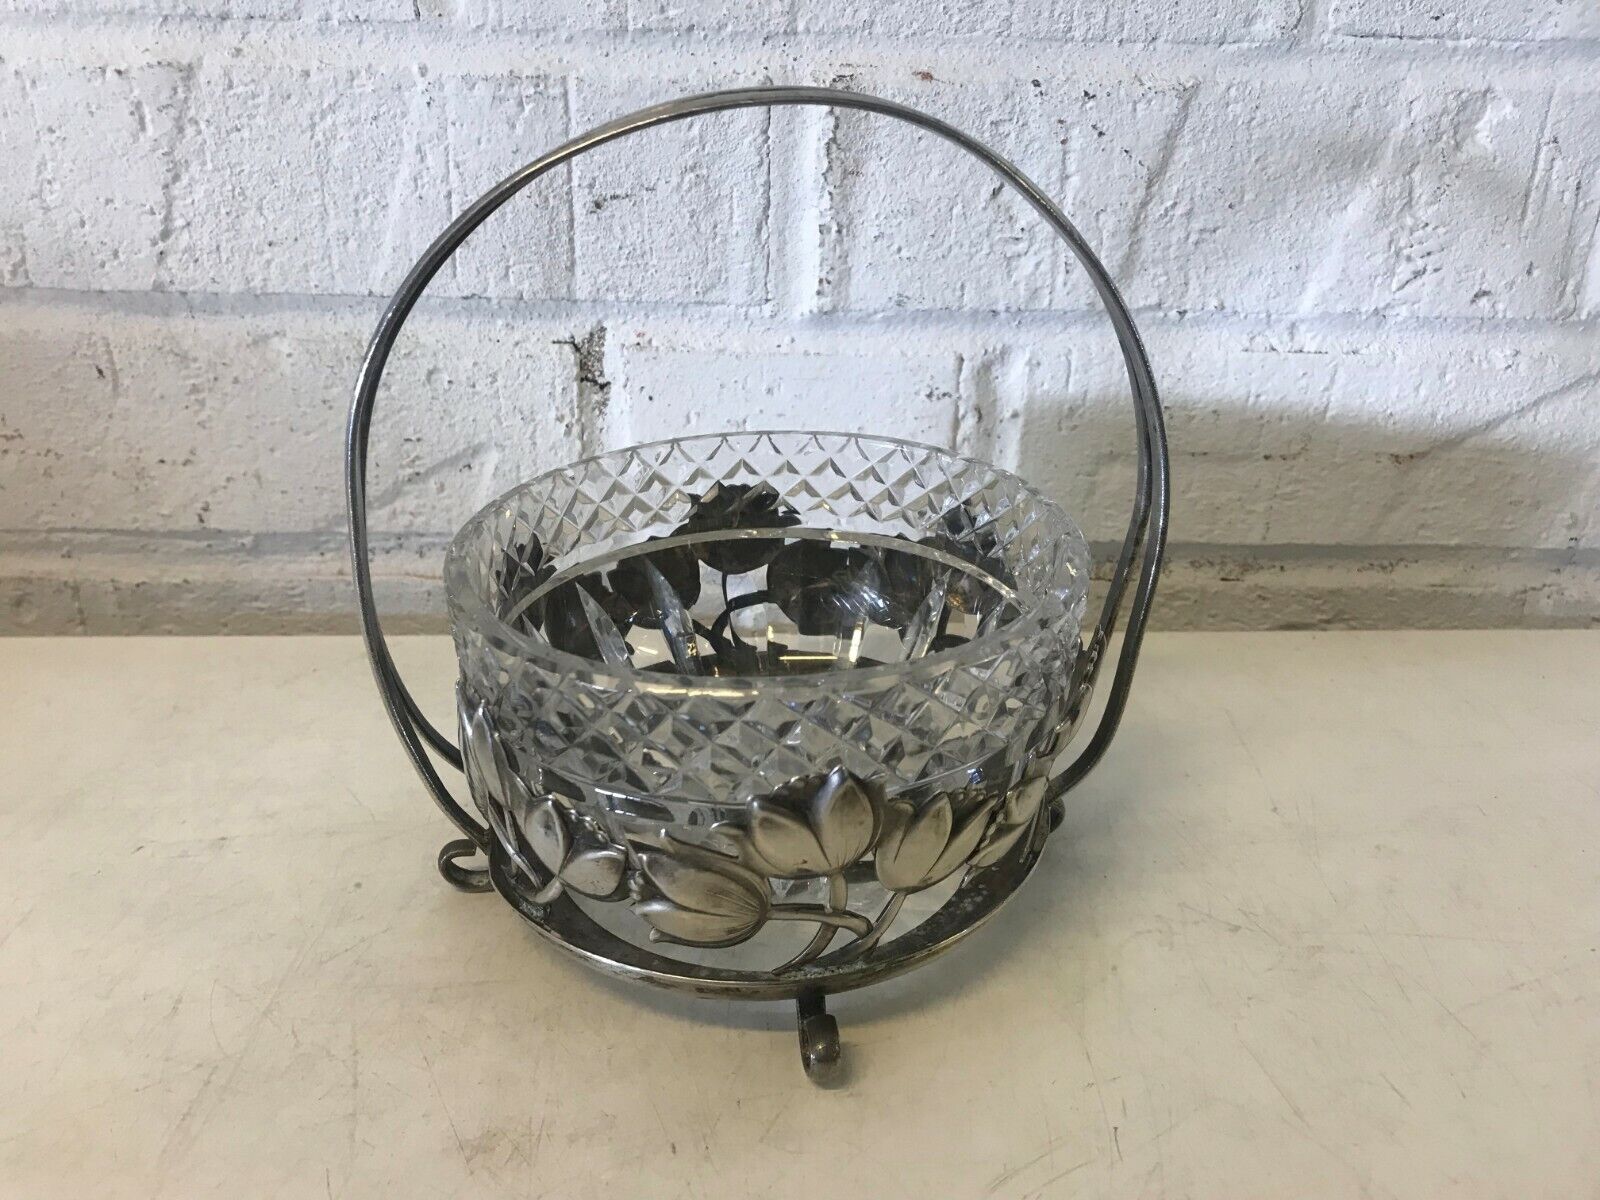 Vintage Silverplated Basket Footed w/ Tulip Flowers designs & Glass Inset Bowl